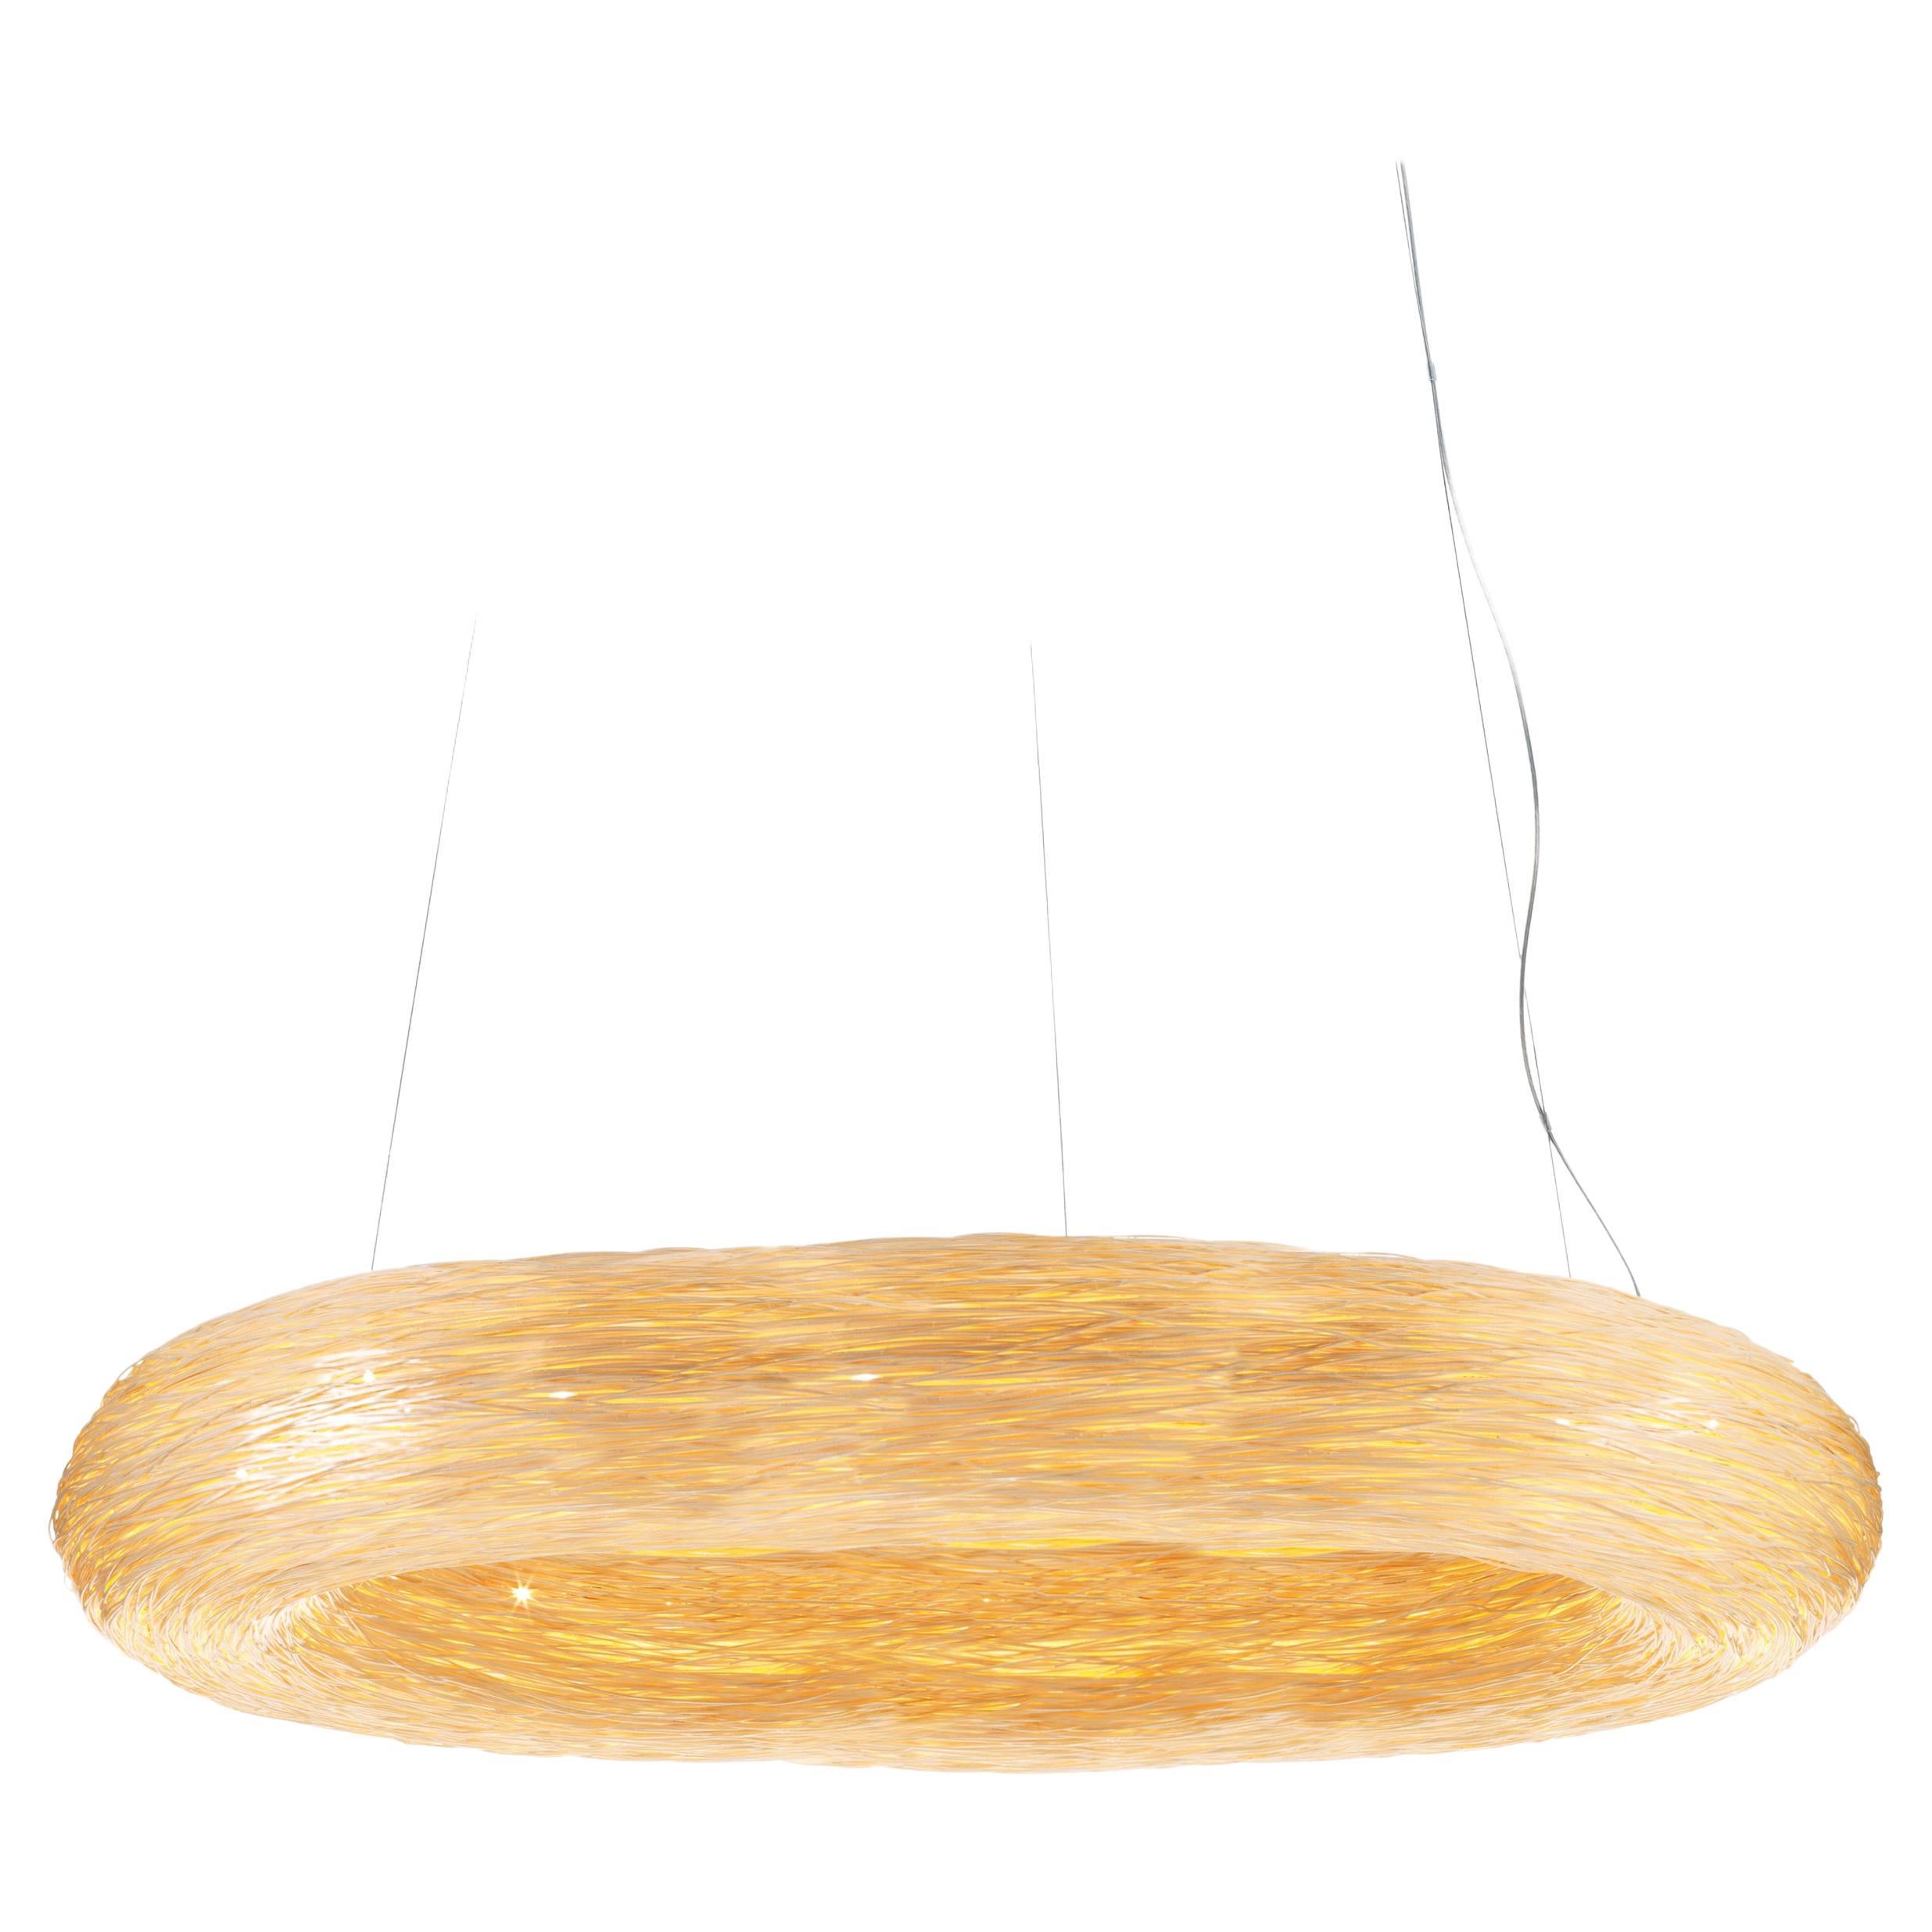 Yellow Crown by Ango, Hand-Woven Pendant Light in a Timeless Circular Form